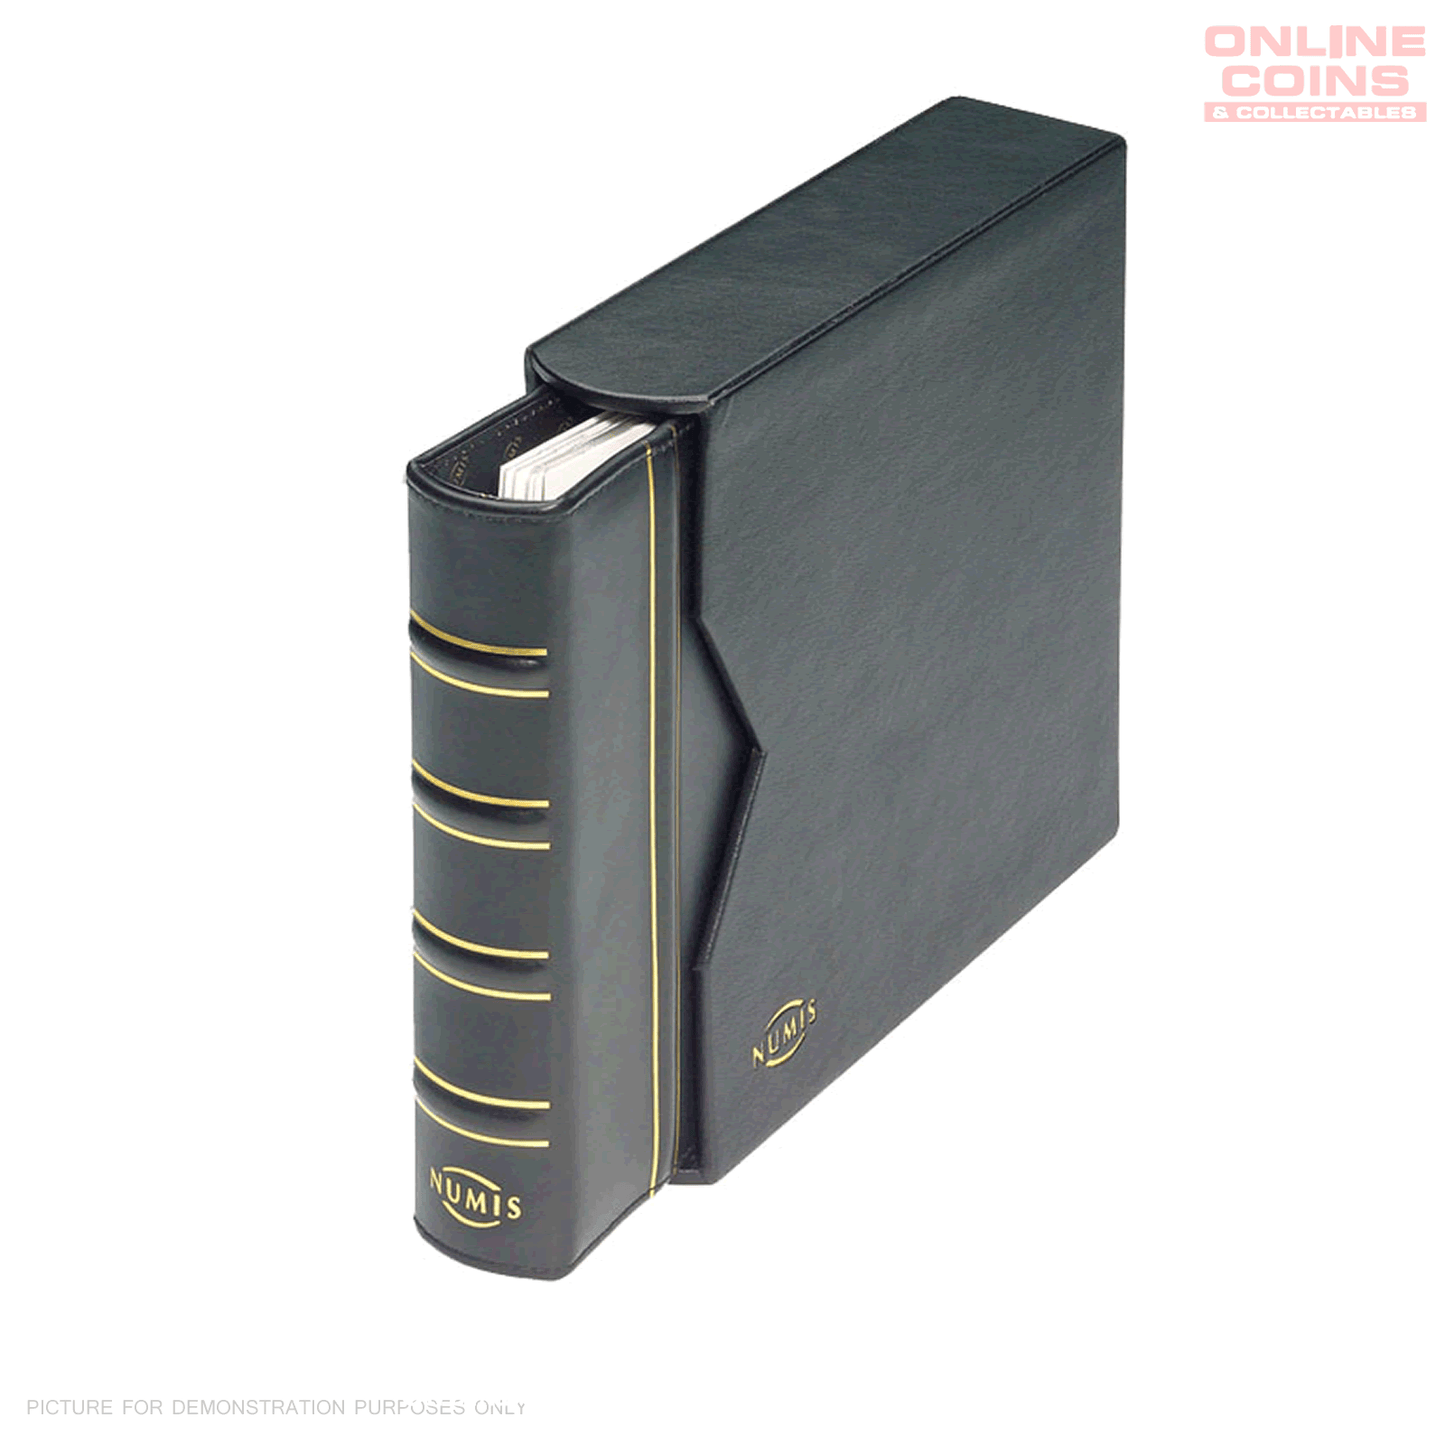 Lighthouse - Classic Leather Numis Coin and Banknote Album With Slipcase - BLACK